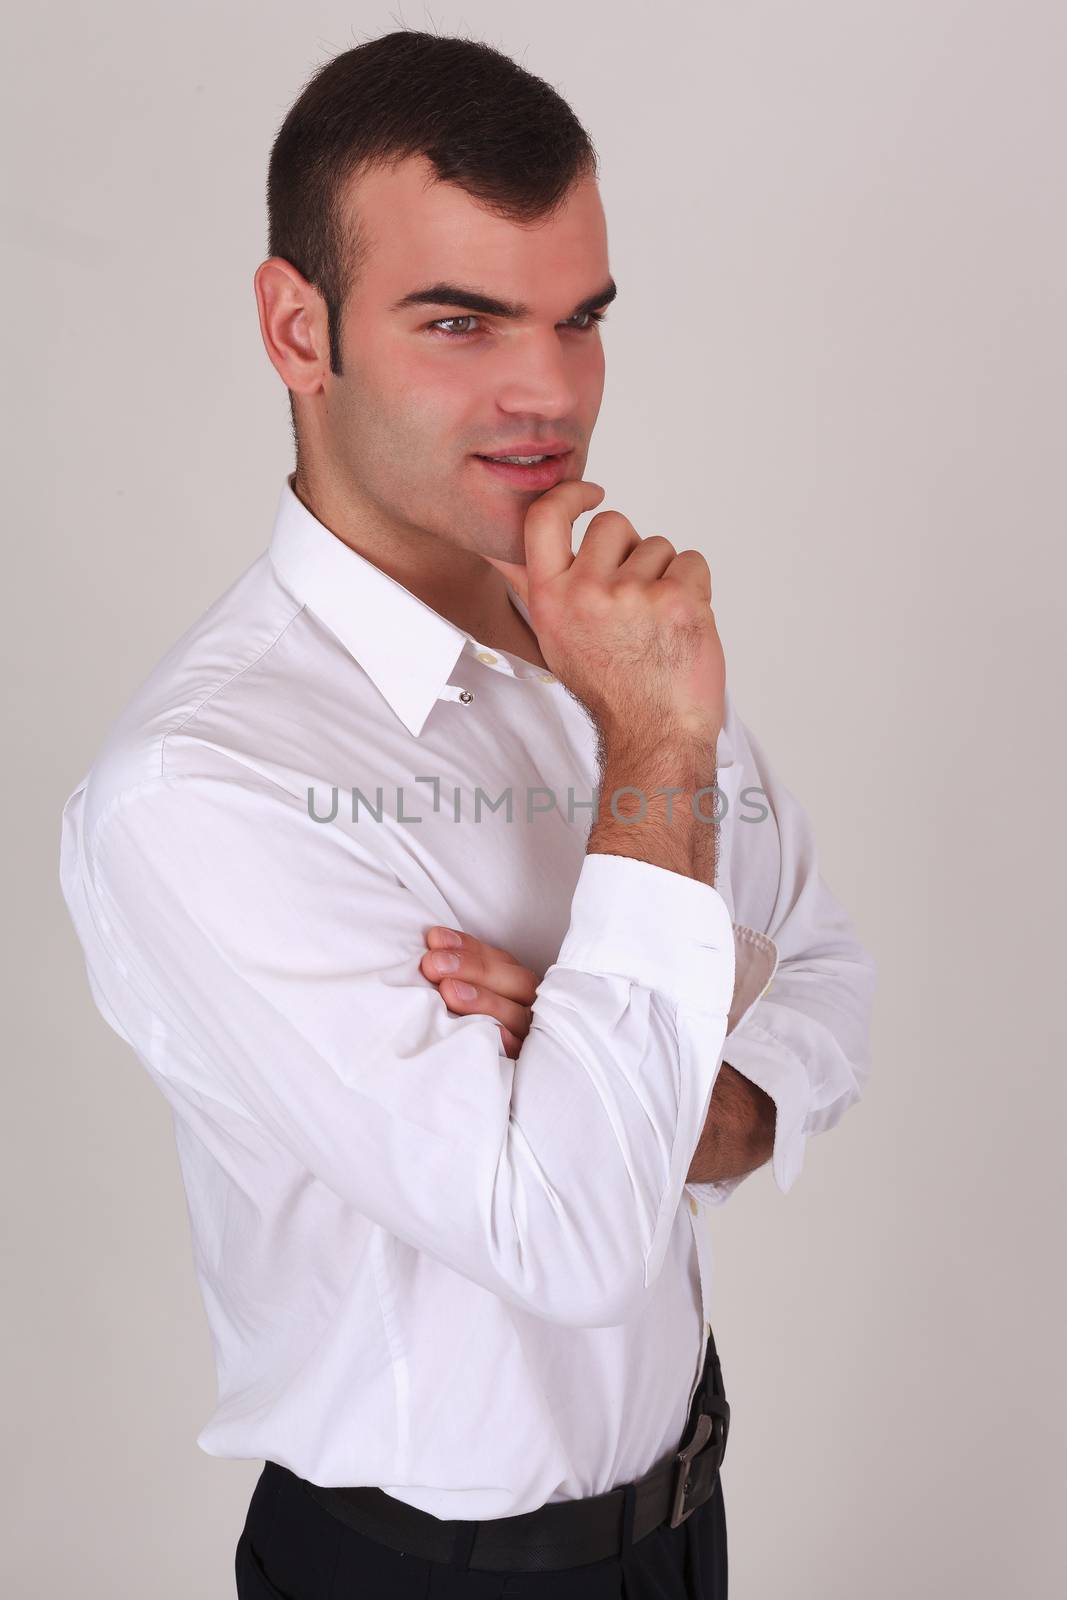 Handsome thoughtful, stylish man in a white shirt, smiling, with his arms crossed over his chest and his finger on the lip, side view on a gray background in studio